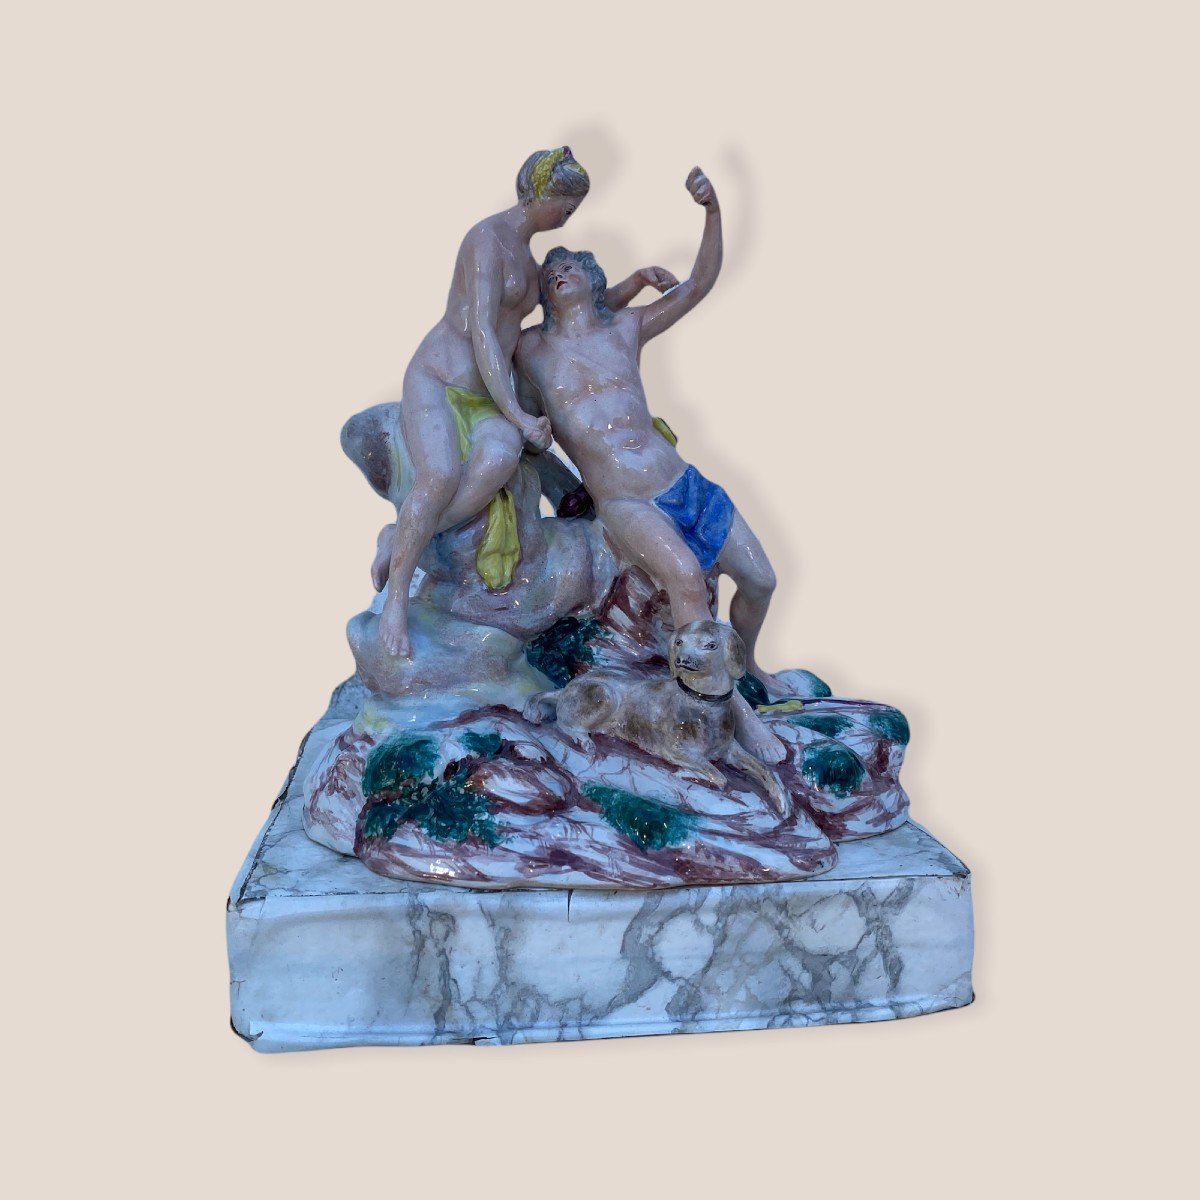 Diane And Endymion, Strasbourg Faience Group Around 1765